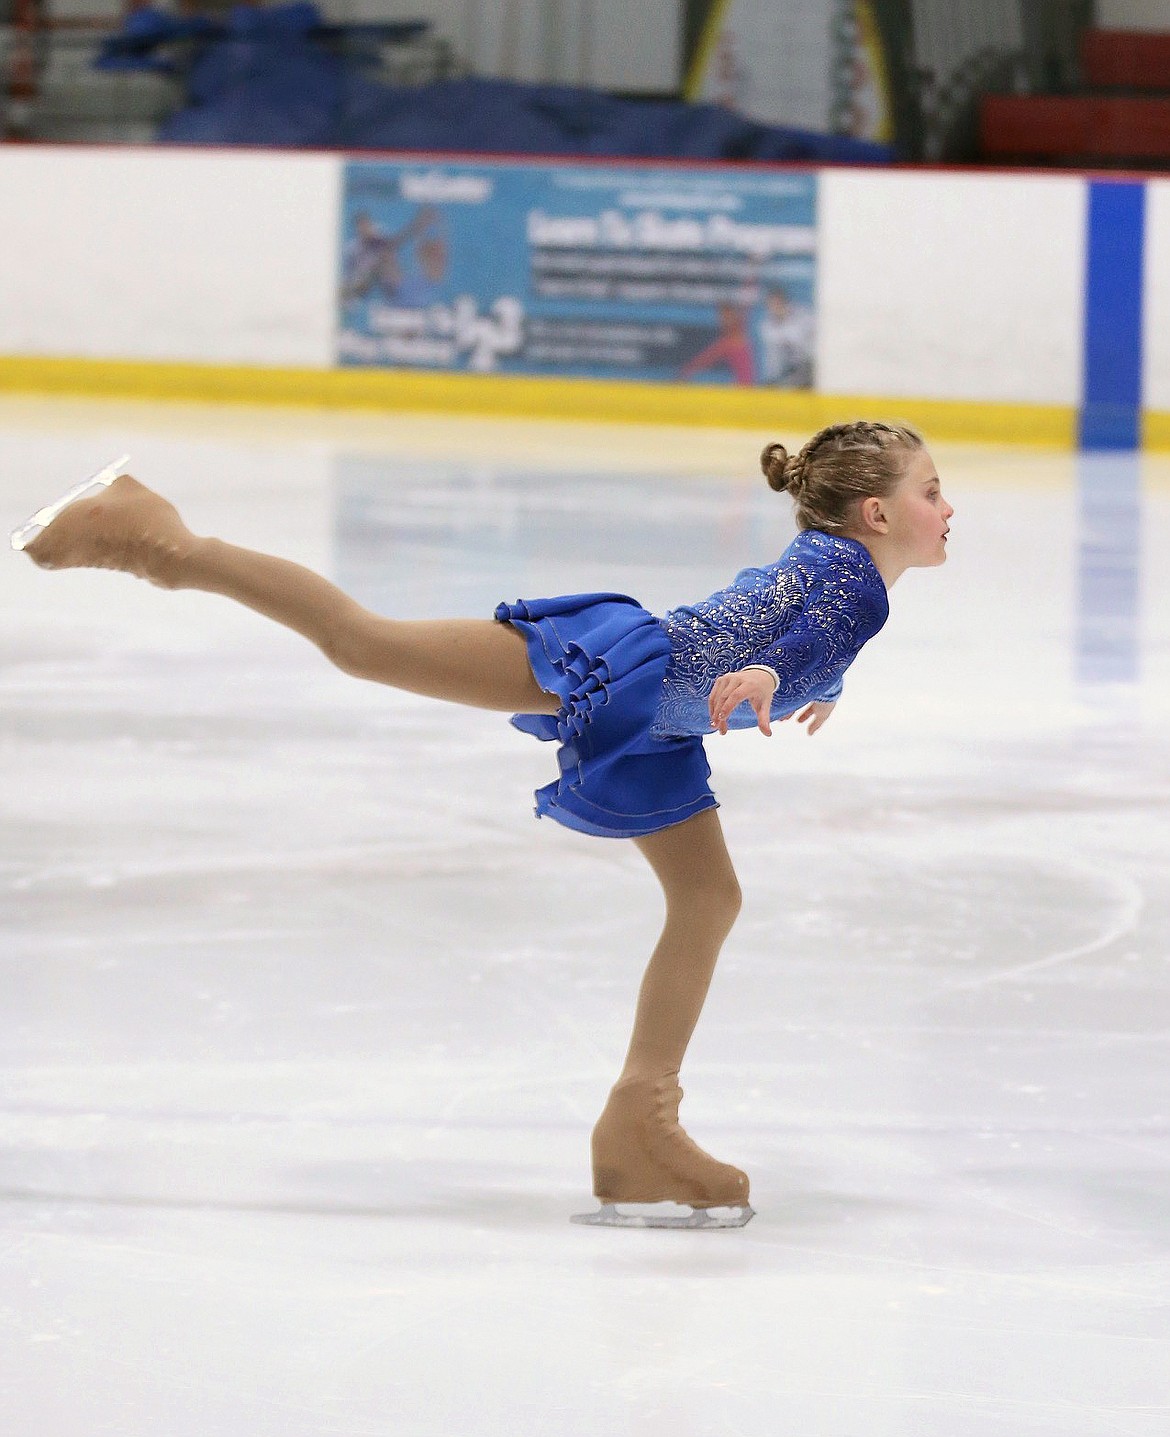 Glacier Skate Academy's aspiring competitive figure skater Isley Simpson, 8, recently passed her first U.S. Figure Skating tests, qualifying her to participate in larger competitions. (Photo provided by Kristin Cowan)